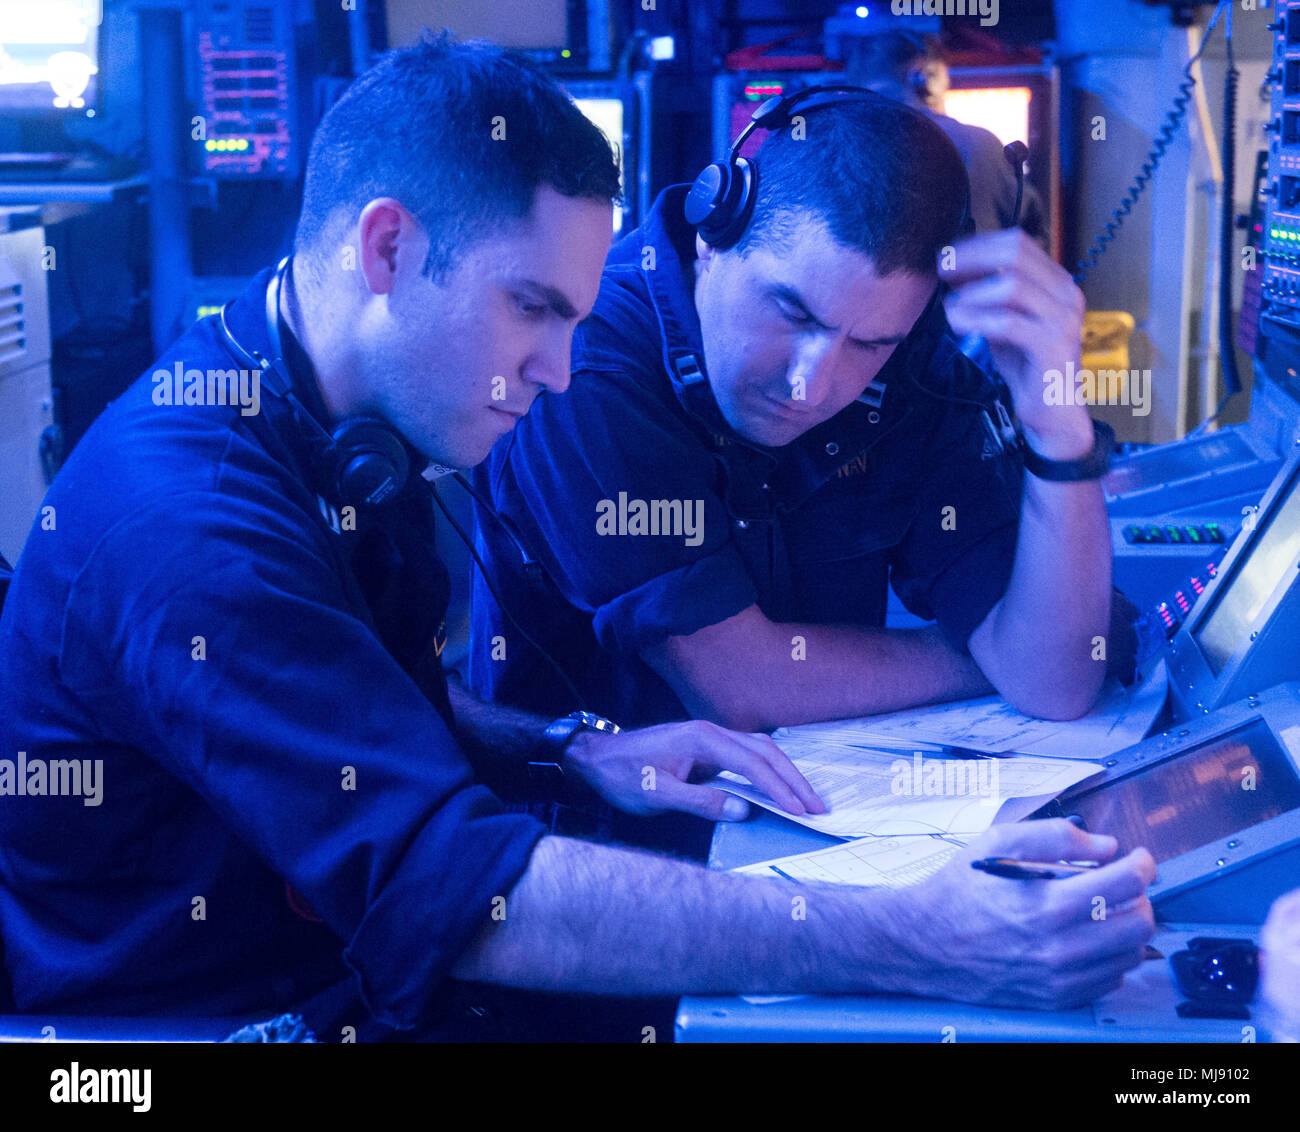 Pacific Ocean (April 20, 2018) Lieutenant Ben Olivas a surface Warfare Tactics Instructor (WTI) assigned to Naval Surface and Mine Warfighting Development Center (SMWDC),  and Lieutenant Chris Bohnker of Naval Operational Support Center (NOSC) Newport, R.I., prepare for an Air Defense exercise during an underway Cruiser-Destroyer (CRUDES) Surface Warfare Advanced Tactical Training (SWATT) exercise aboard USS Stockdale (DDG 106).  Stockdale is one of three CRUDES warships from USS John C. Stennis (CVN 74) Carrier Strike Group (CSG) completing a CRUDES SWATT exercise.  The other ships participat Stock Photo